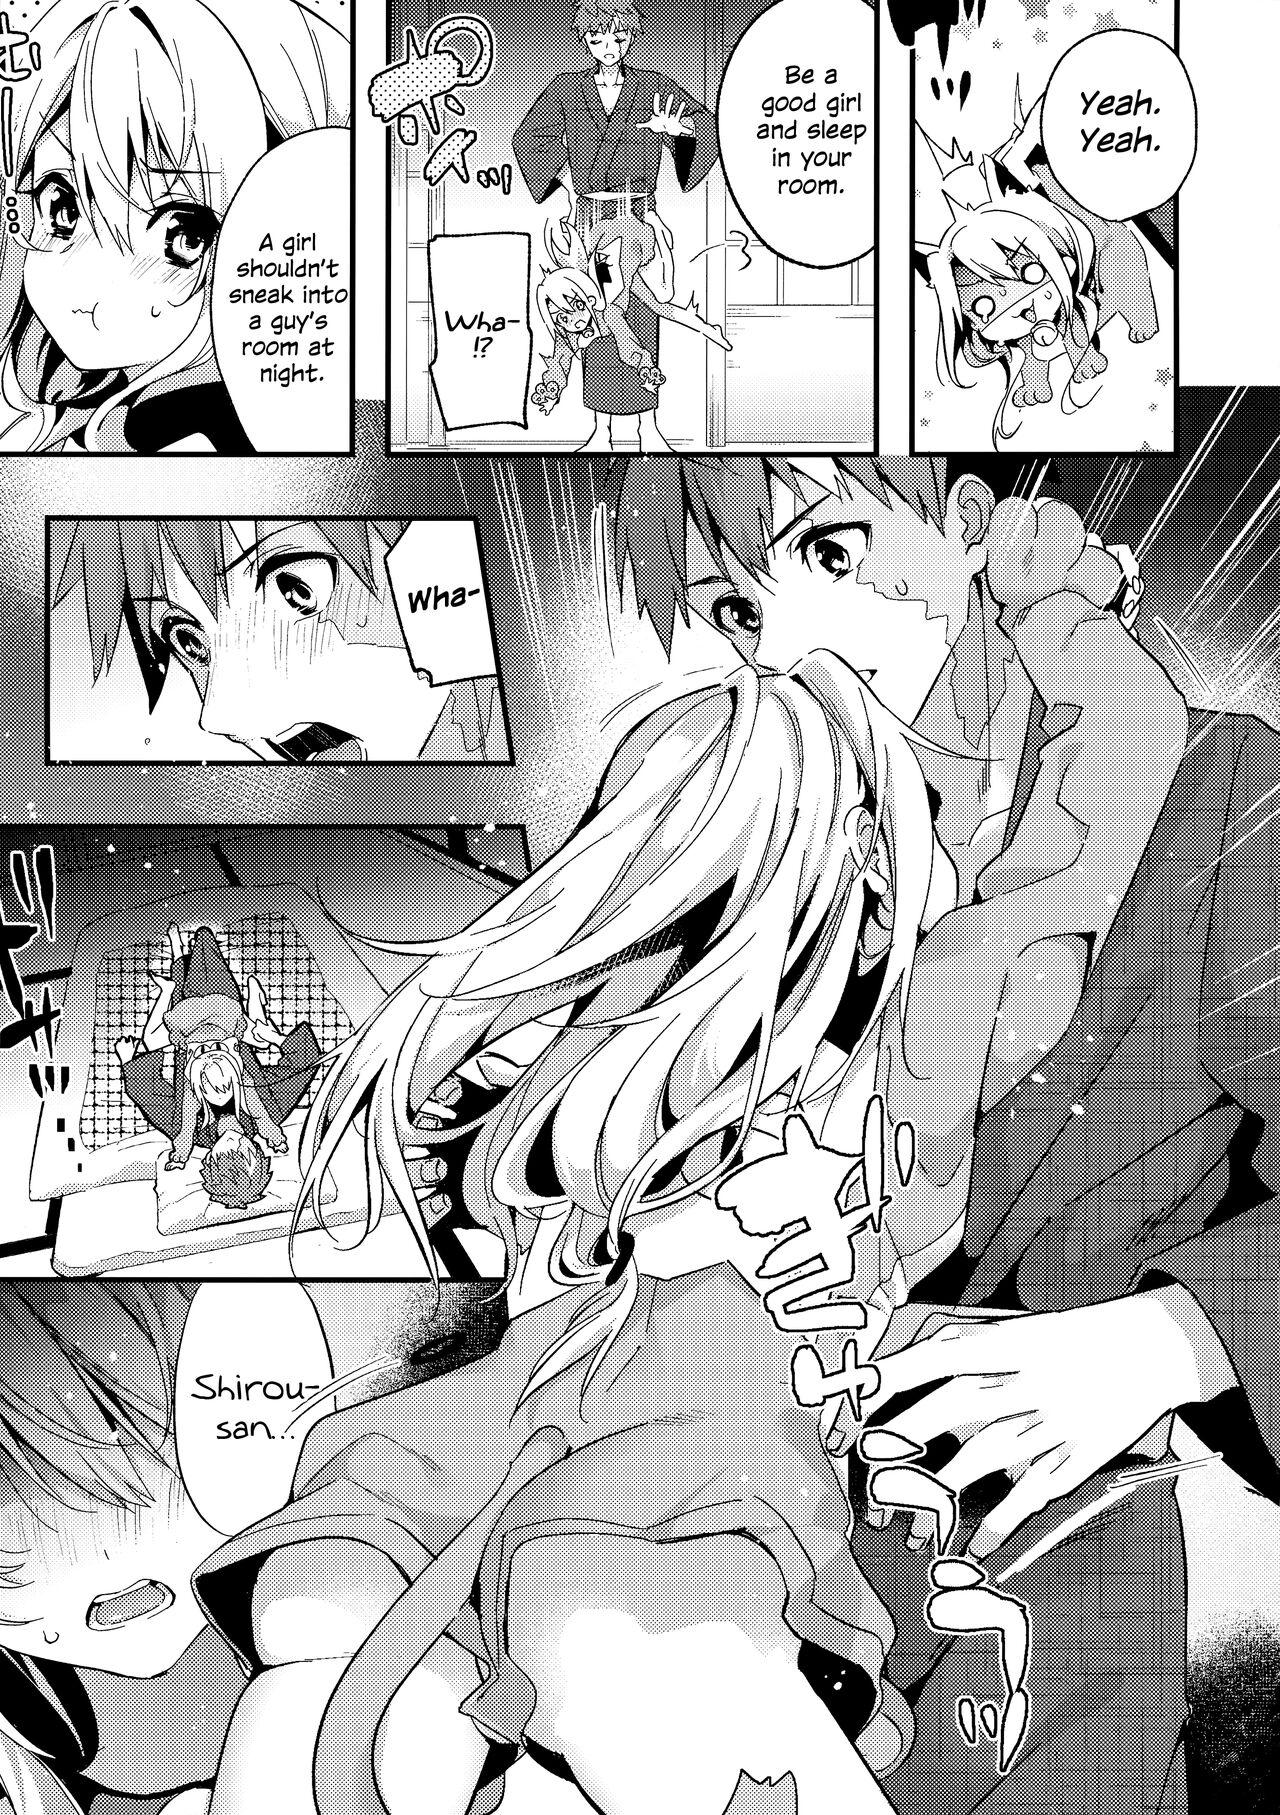 Home Onii-chan, Illya to Shiyo? - Fate kaleid liner prisma illya Perra - Page 6